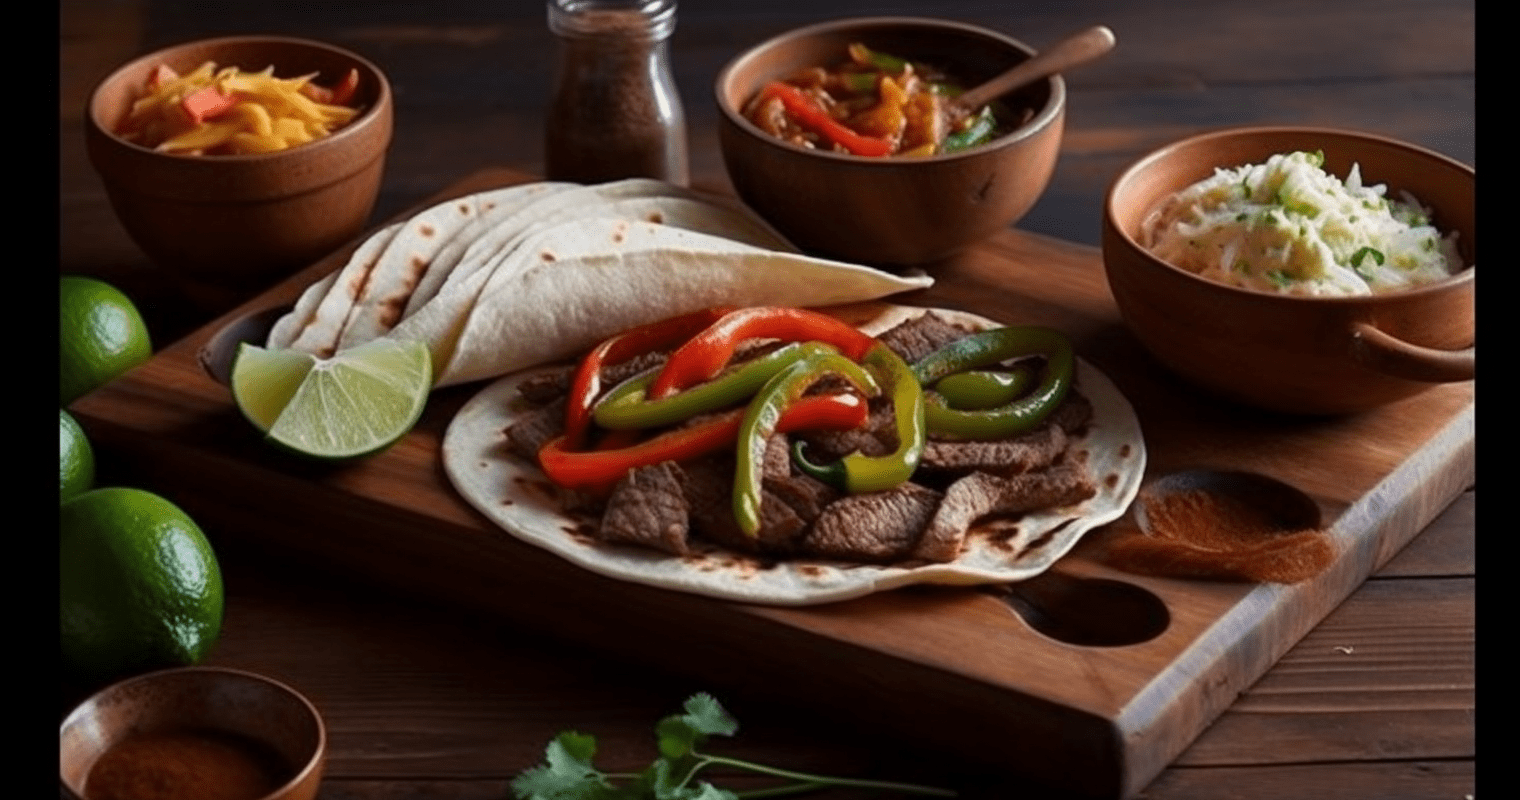 Discover the Authentic Flavors of Restaurant-Style Fajitas